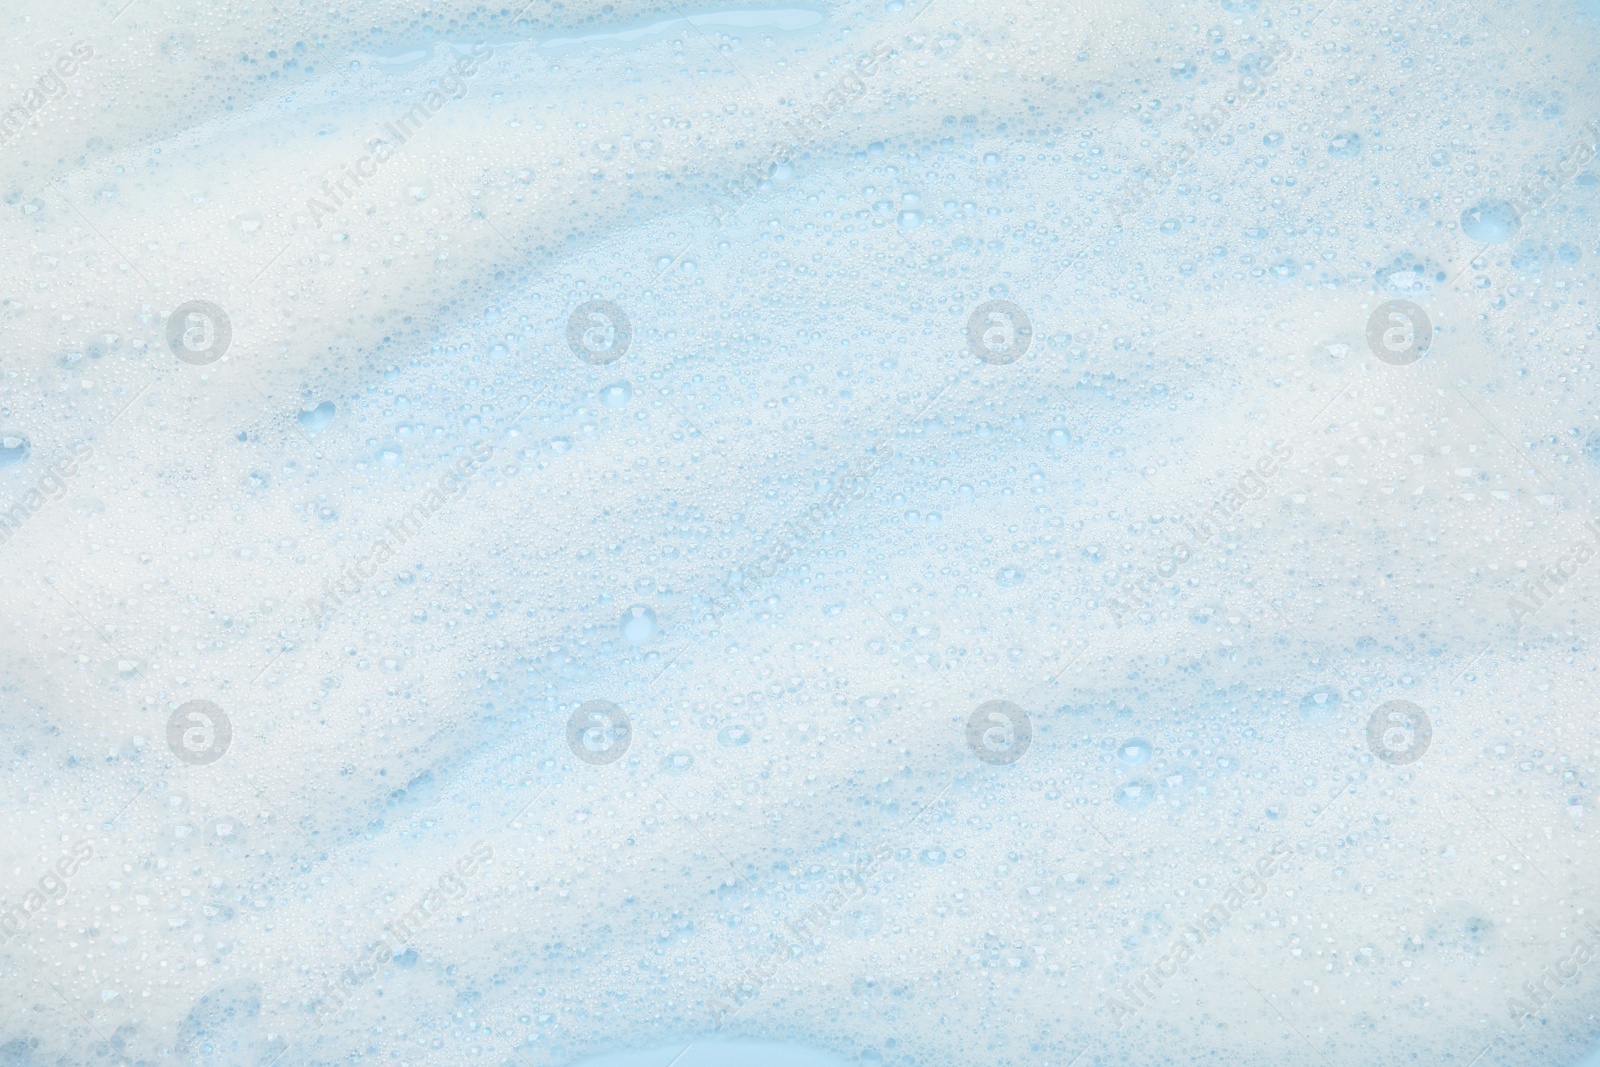 Photo of White washing foam on light blue background, top view